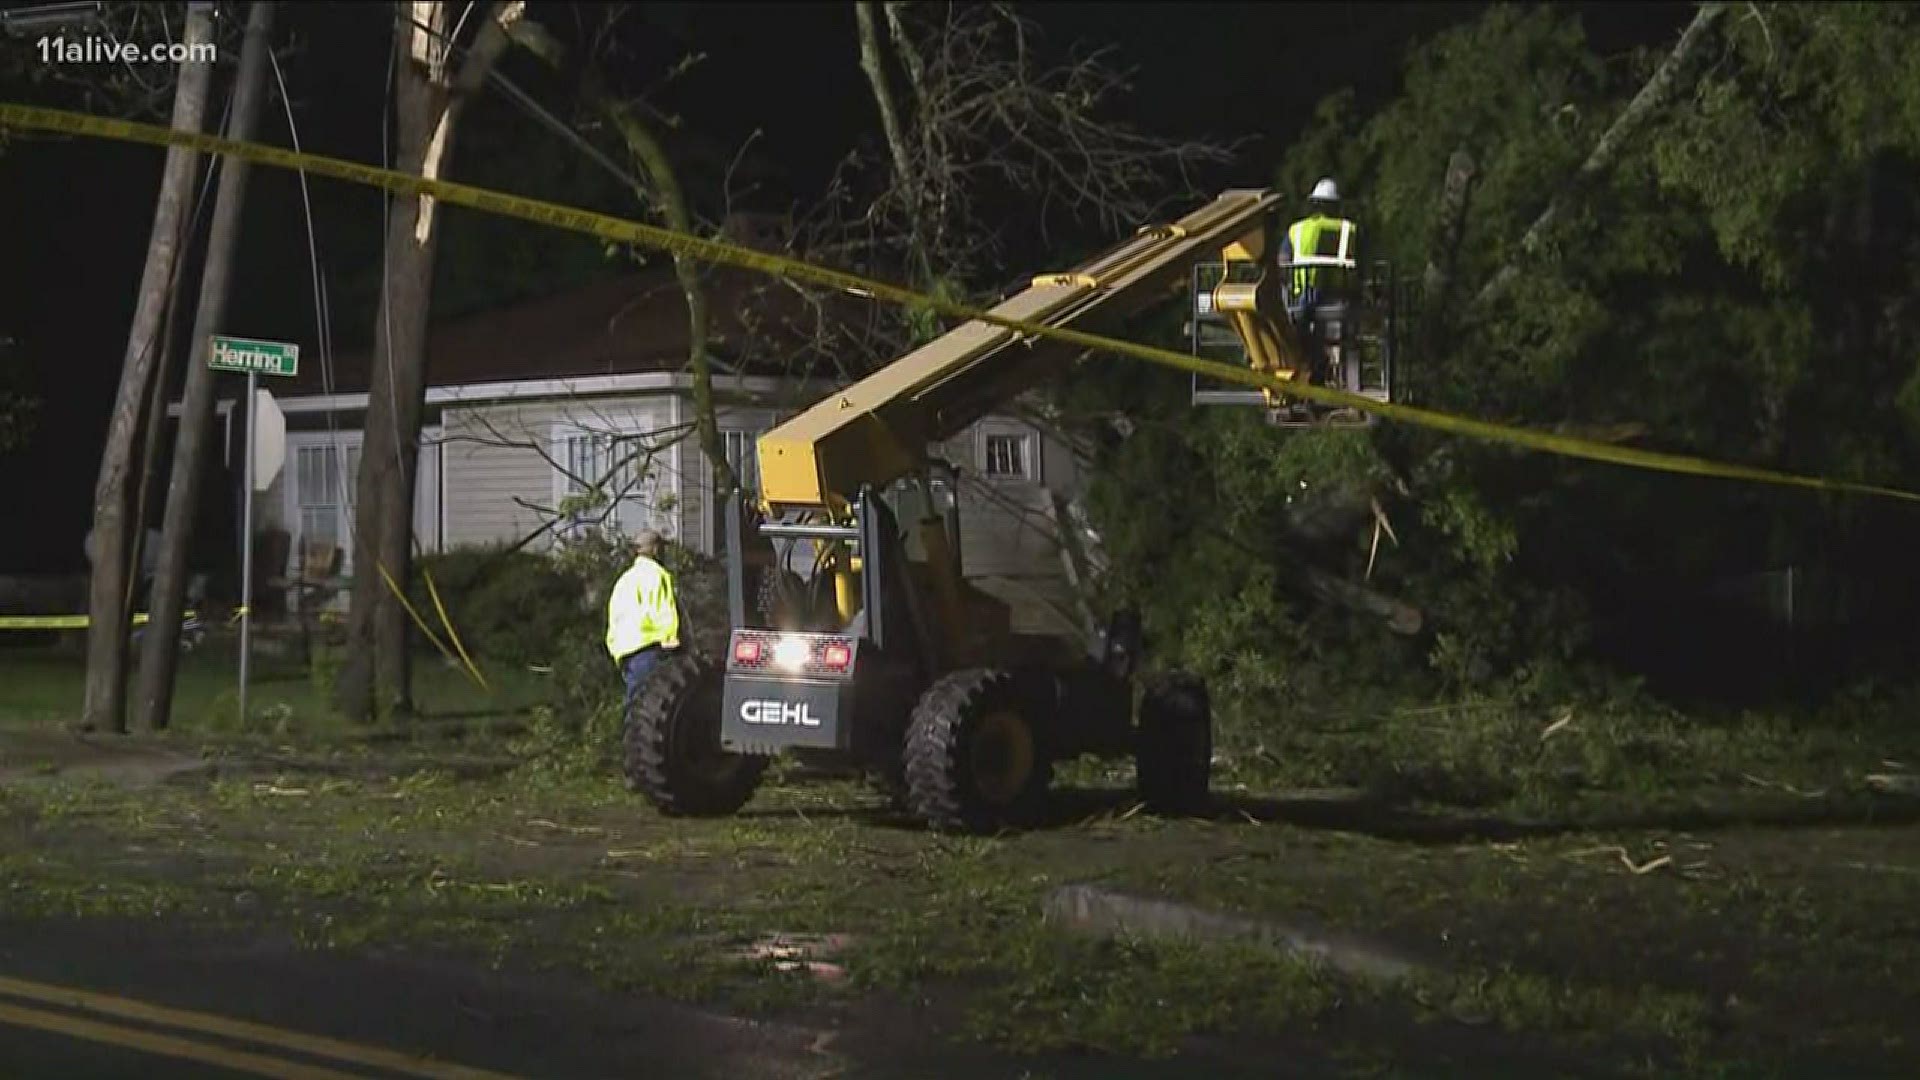 The incident happened during the height of the storms in Cartersville.